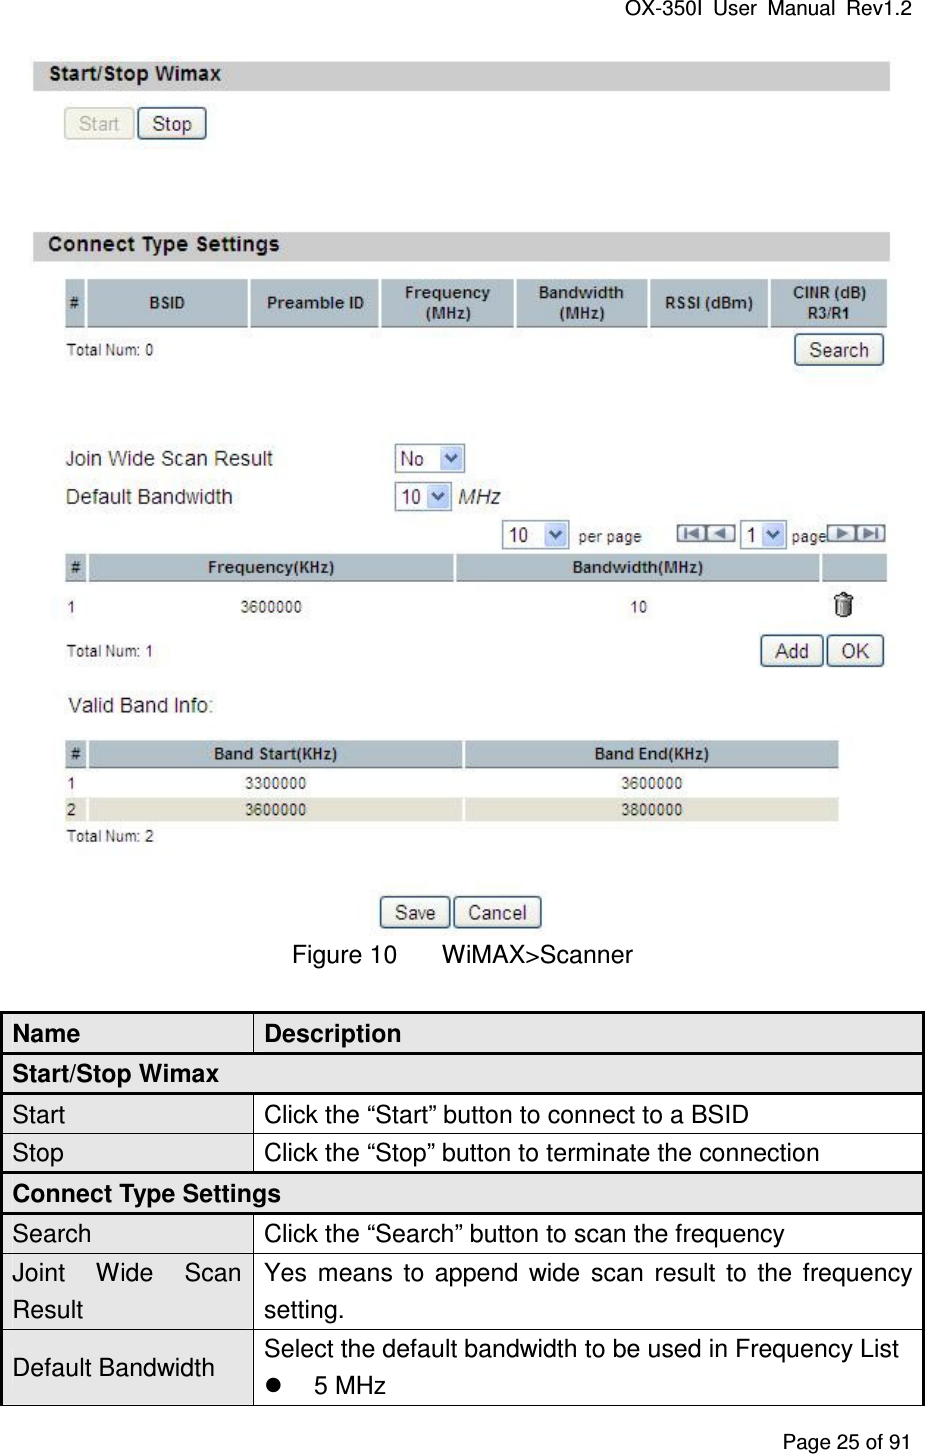 OX-350I  User  Manual  Rev1.2 Page 25 of 91  Figure 10  WiMAX&gt;Scanner Name  Description Start/Stop Wimax Start  Click the “Start” button to connect to a BSID Stop  Click the “Stop” button to terminate the connection Connect Type Settings Search  Click the “Search” button to scan the frequency Joint  Wide  Scan Result Yes  means  to  append  wide  scan  result  to  the  frequency setting. Default Bandwidth  Select the default bandwidth to be used in Frequency List   5 MHz 